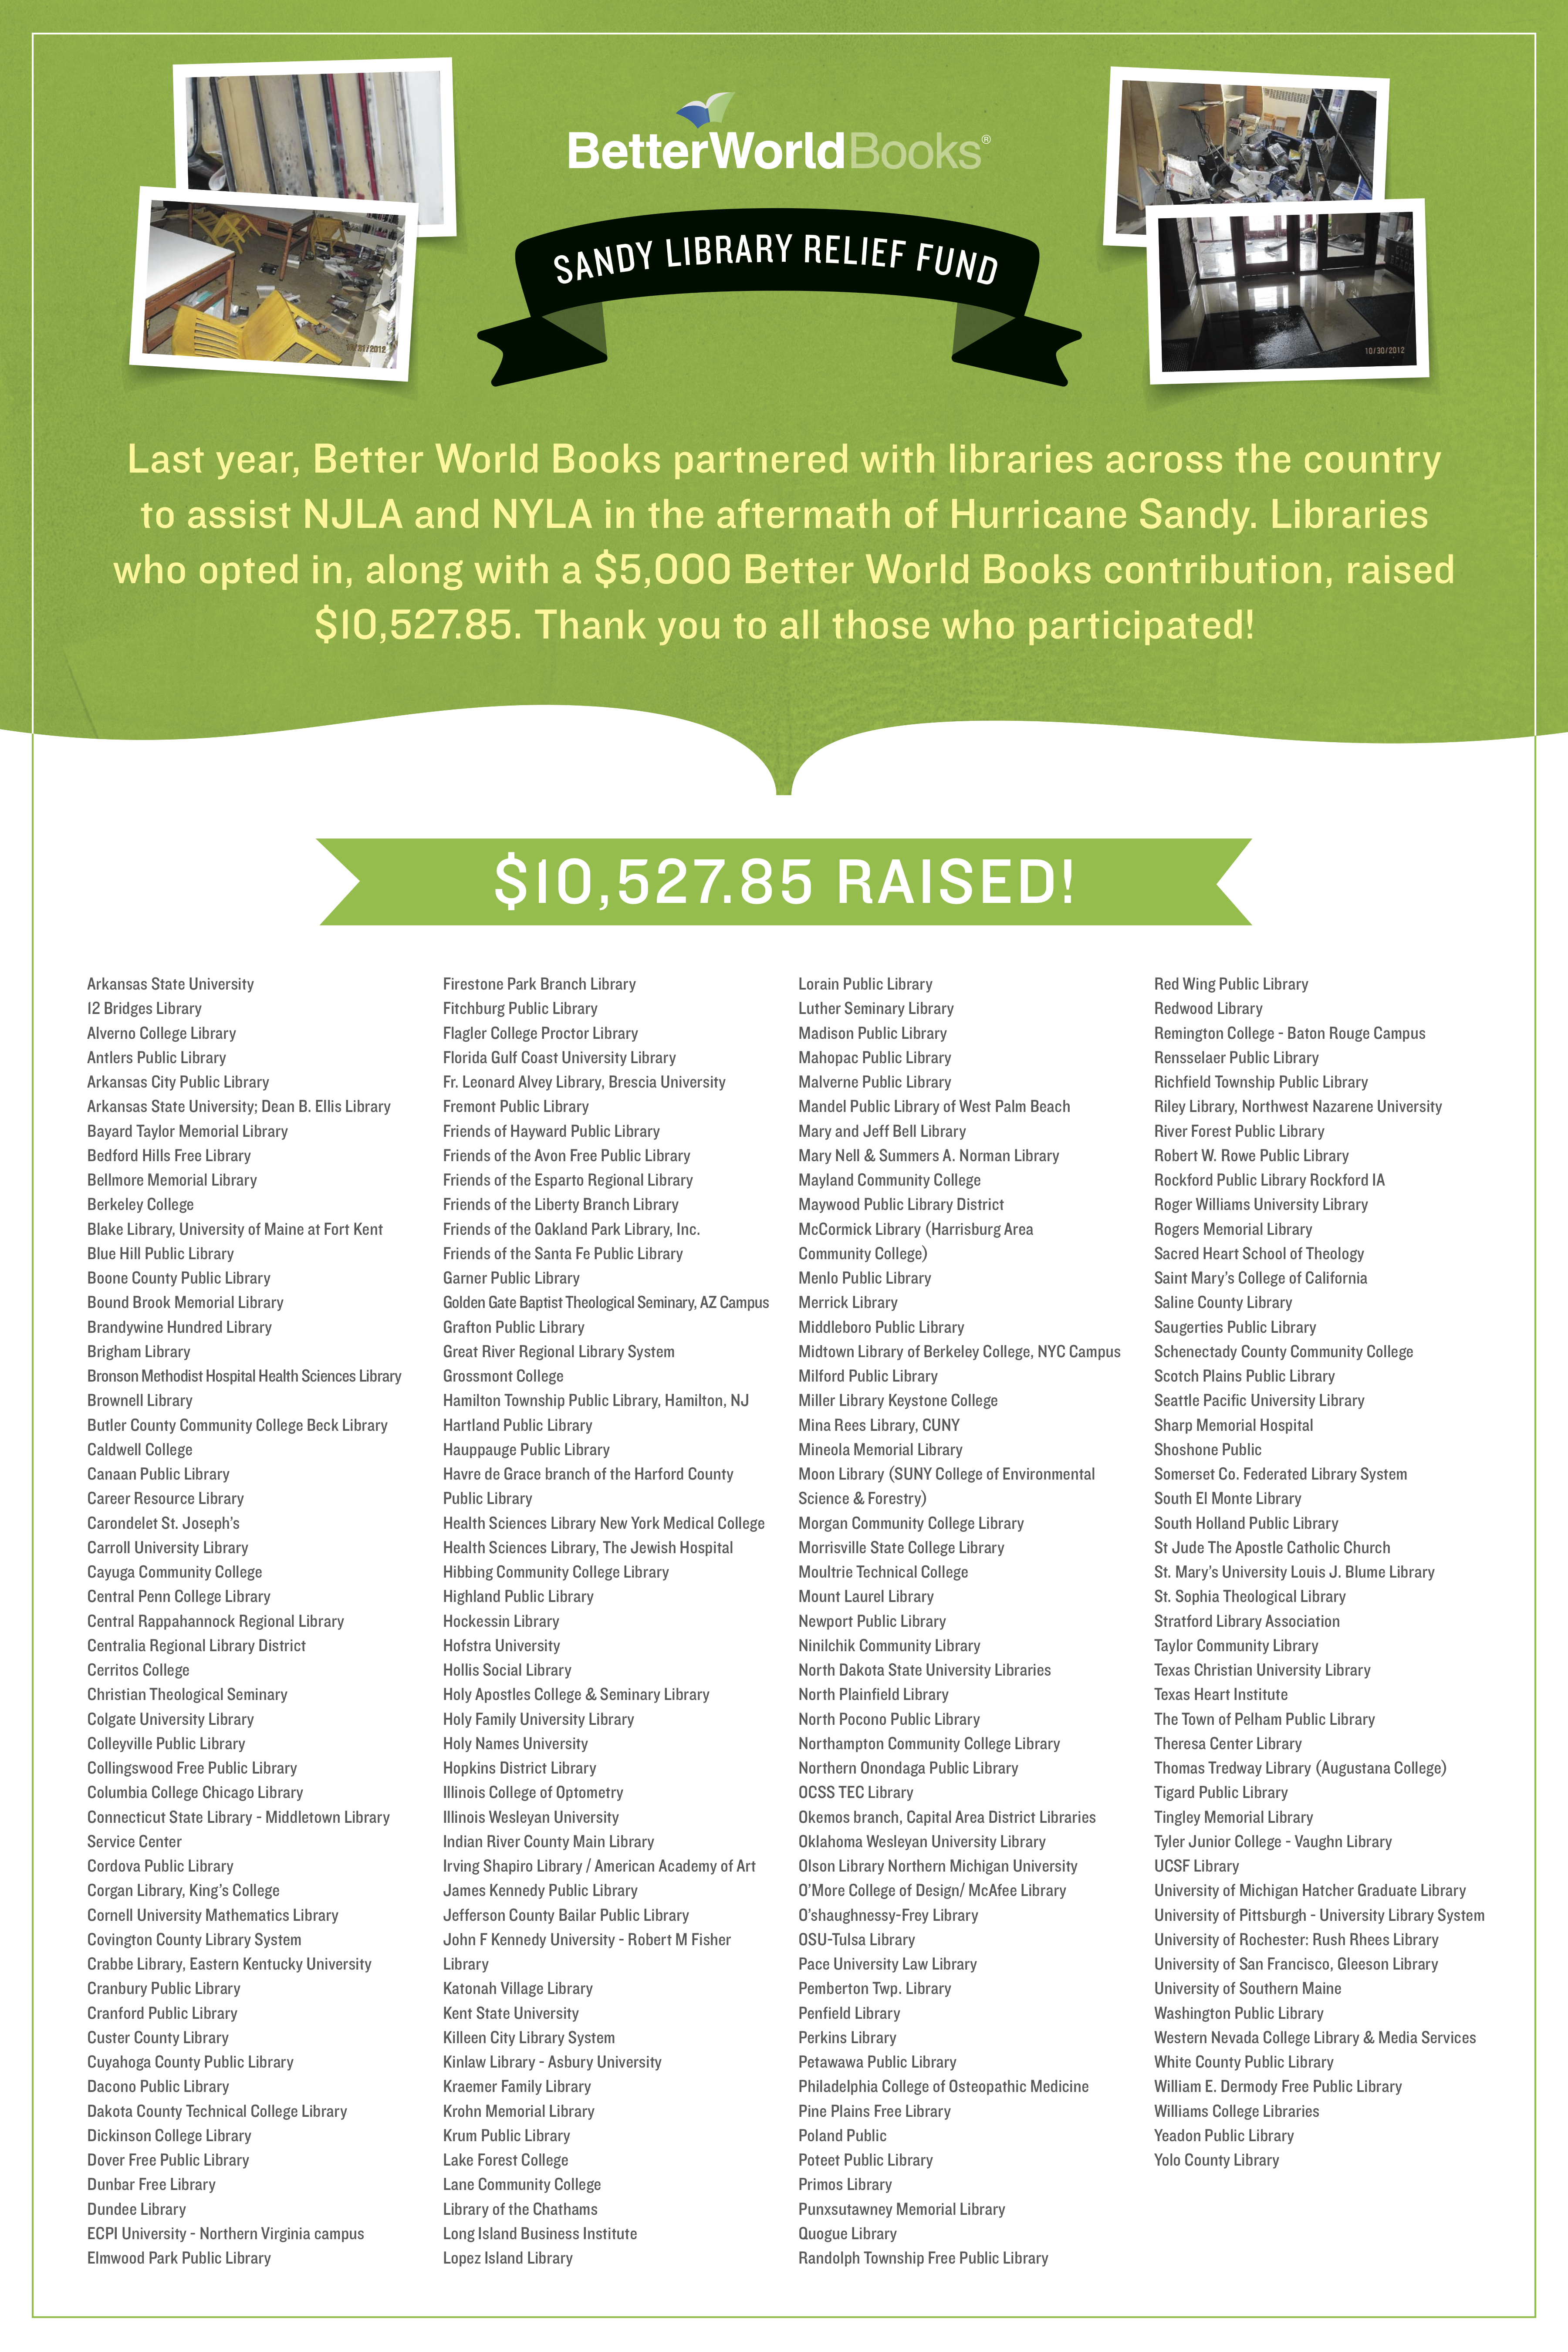 Better World Books Thanks Everyone Who Helped with Sandy Relief Fund